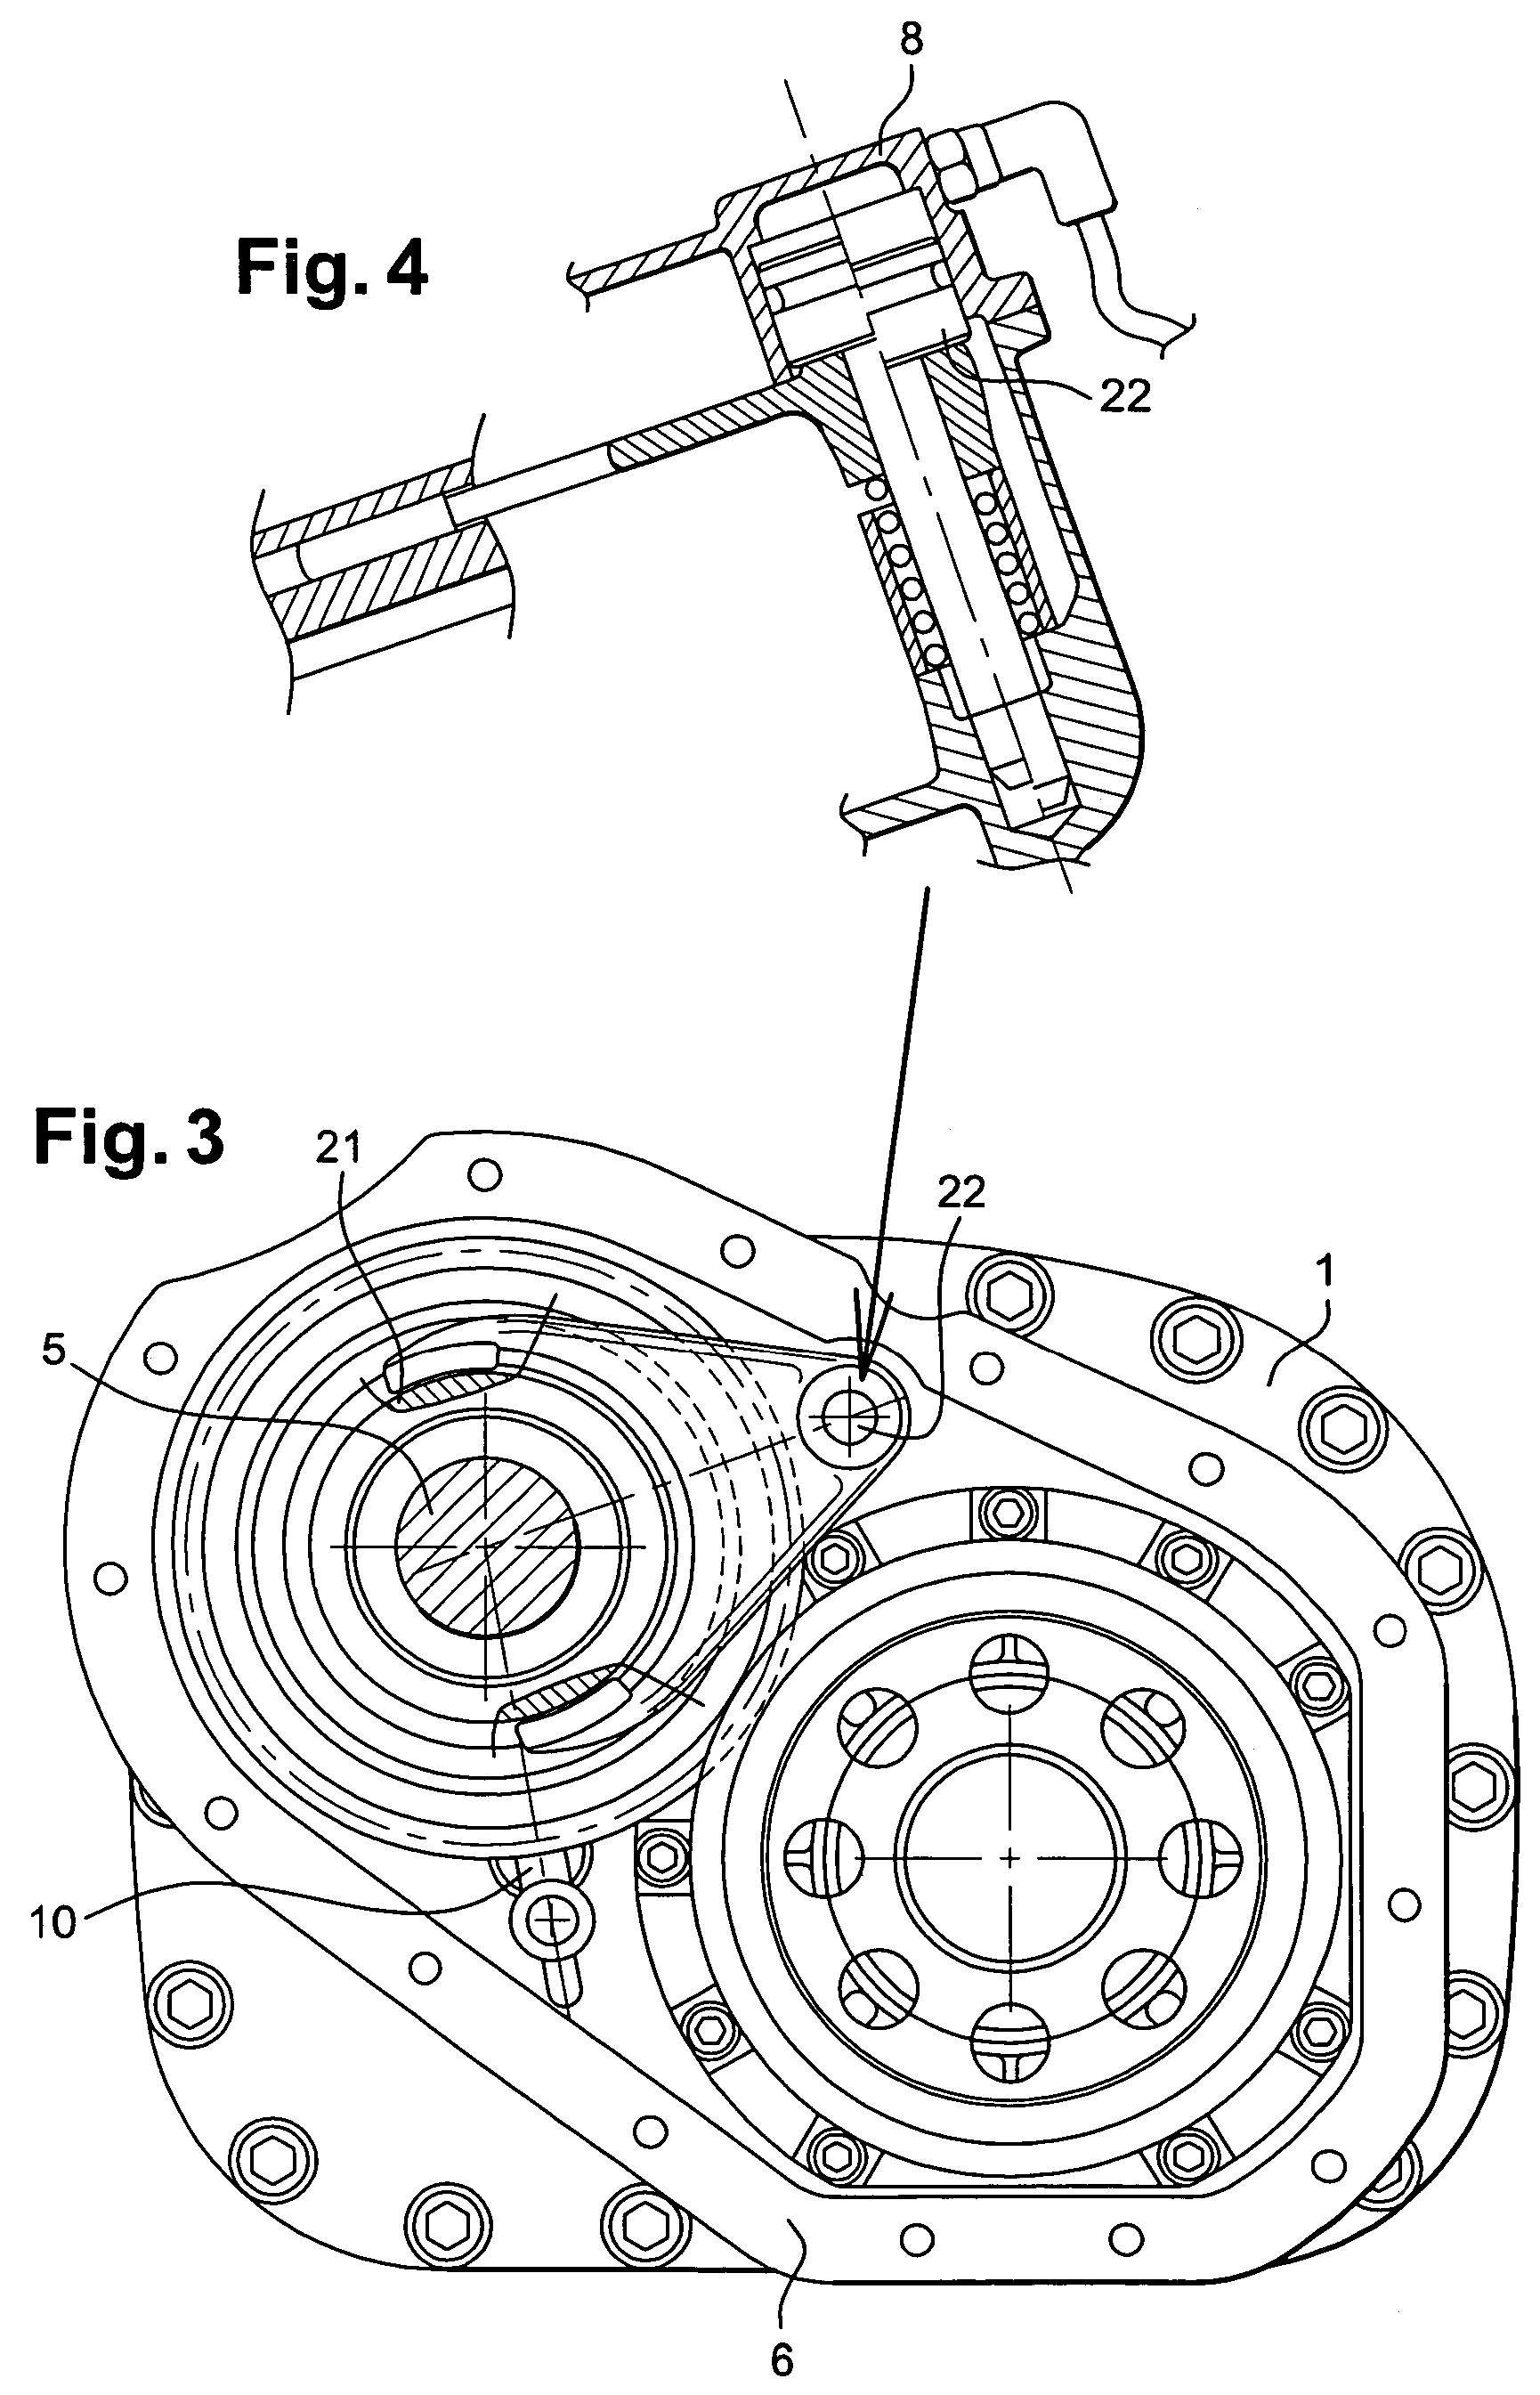 Mechanical adapter assembly